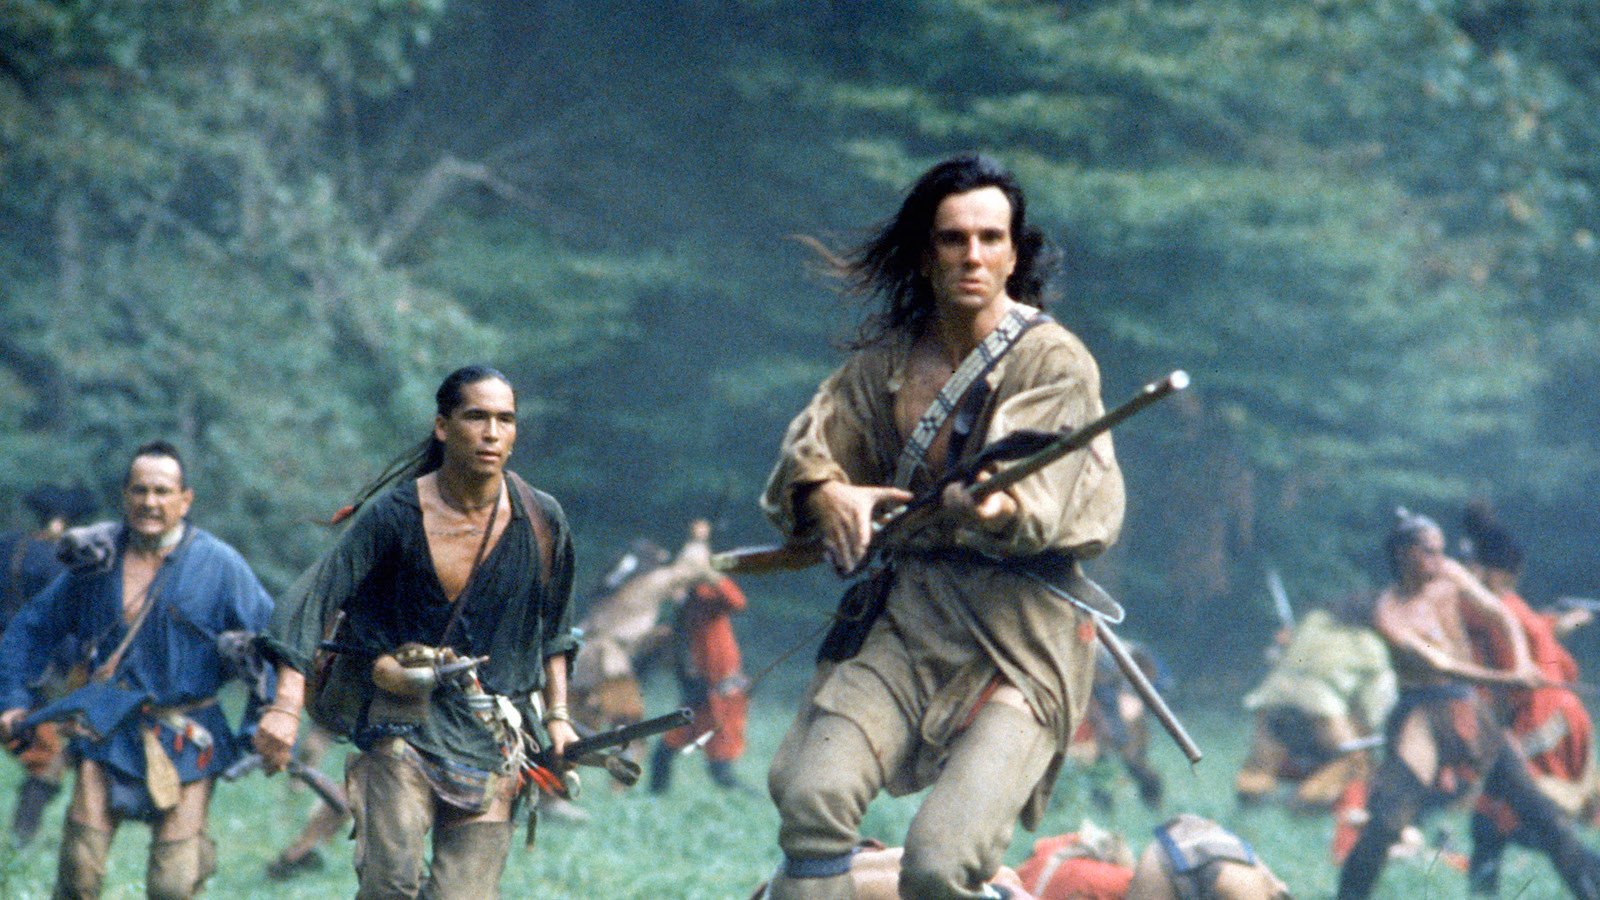 A long-haired man with a rifle, surrounded by other Native American warriors, runs through a field surrounded by trees and mountains